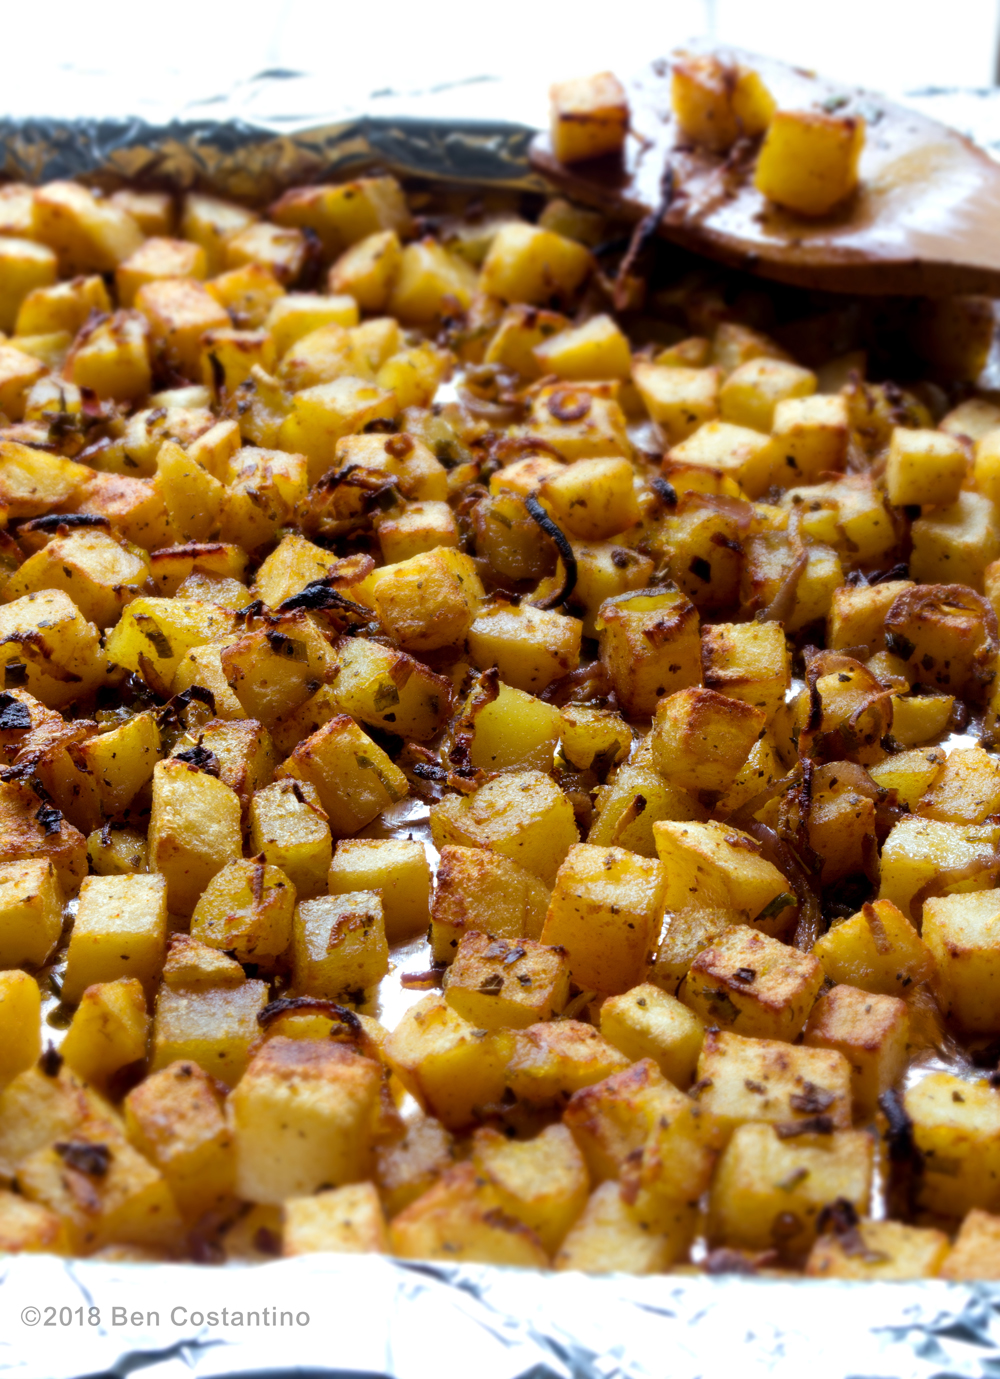 Homefries fresh out of the broiler method.